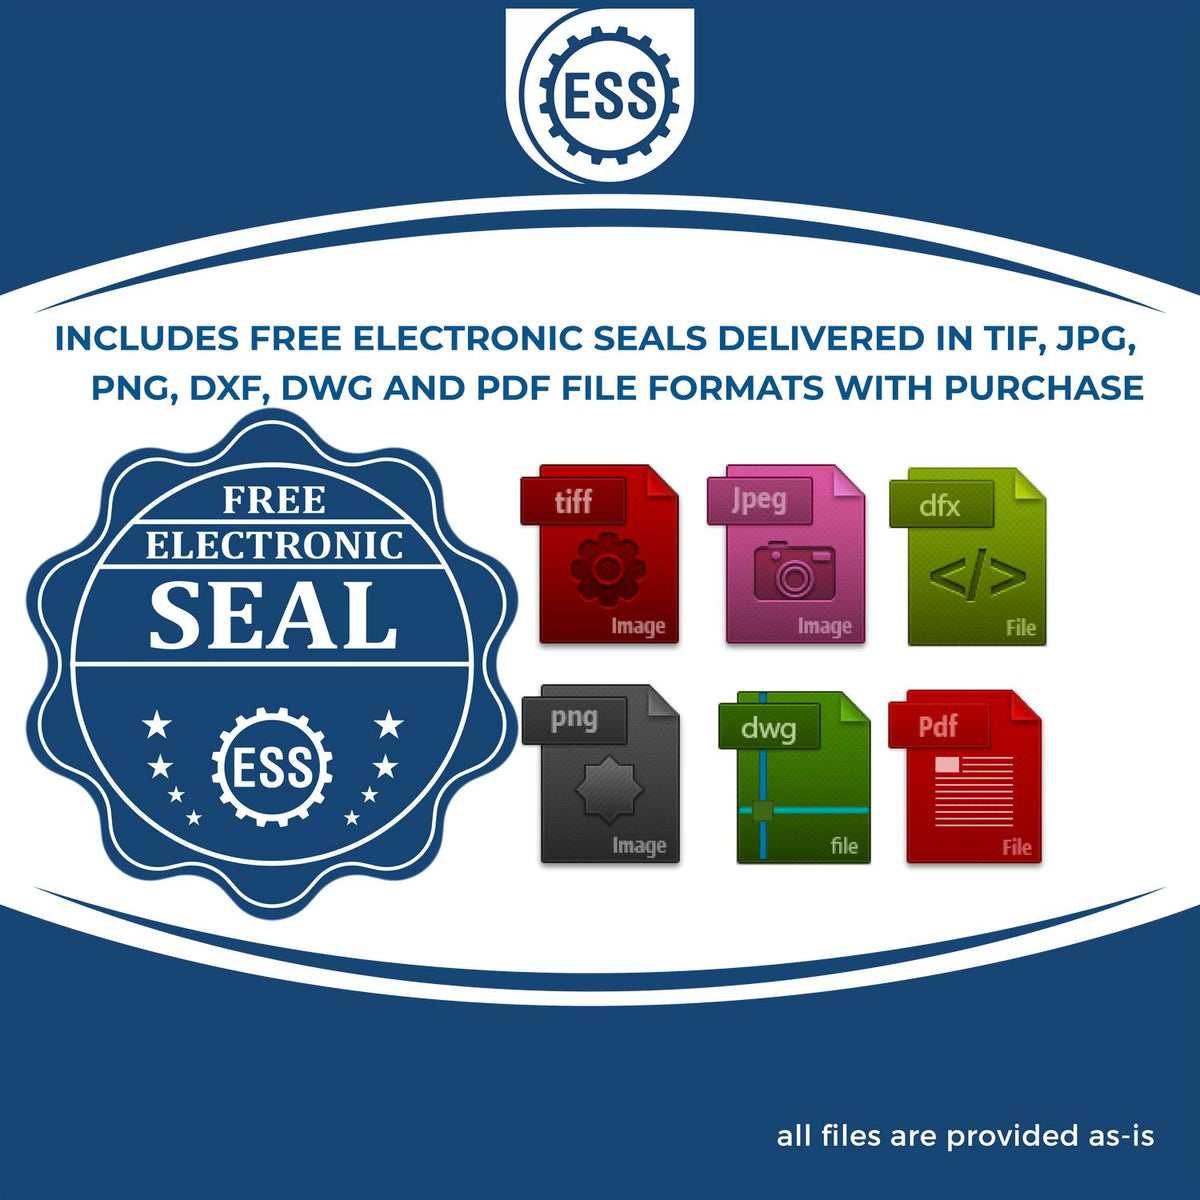 An infographic for the free electronic seal for the Self-Inking West Virginia PE Stamp illustrating the different file type icons such as DXF, DWG, TIF, JPG and PNG.